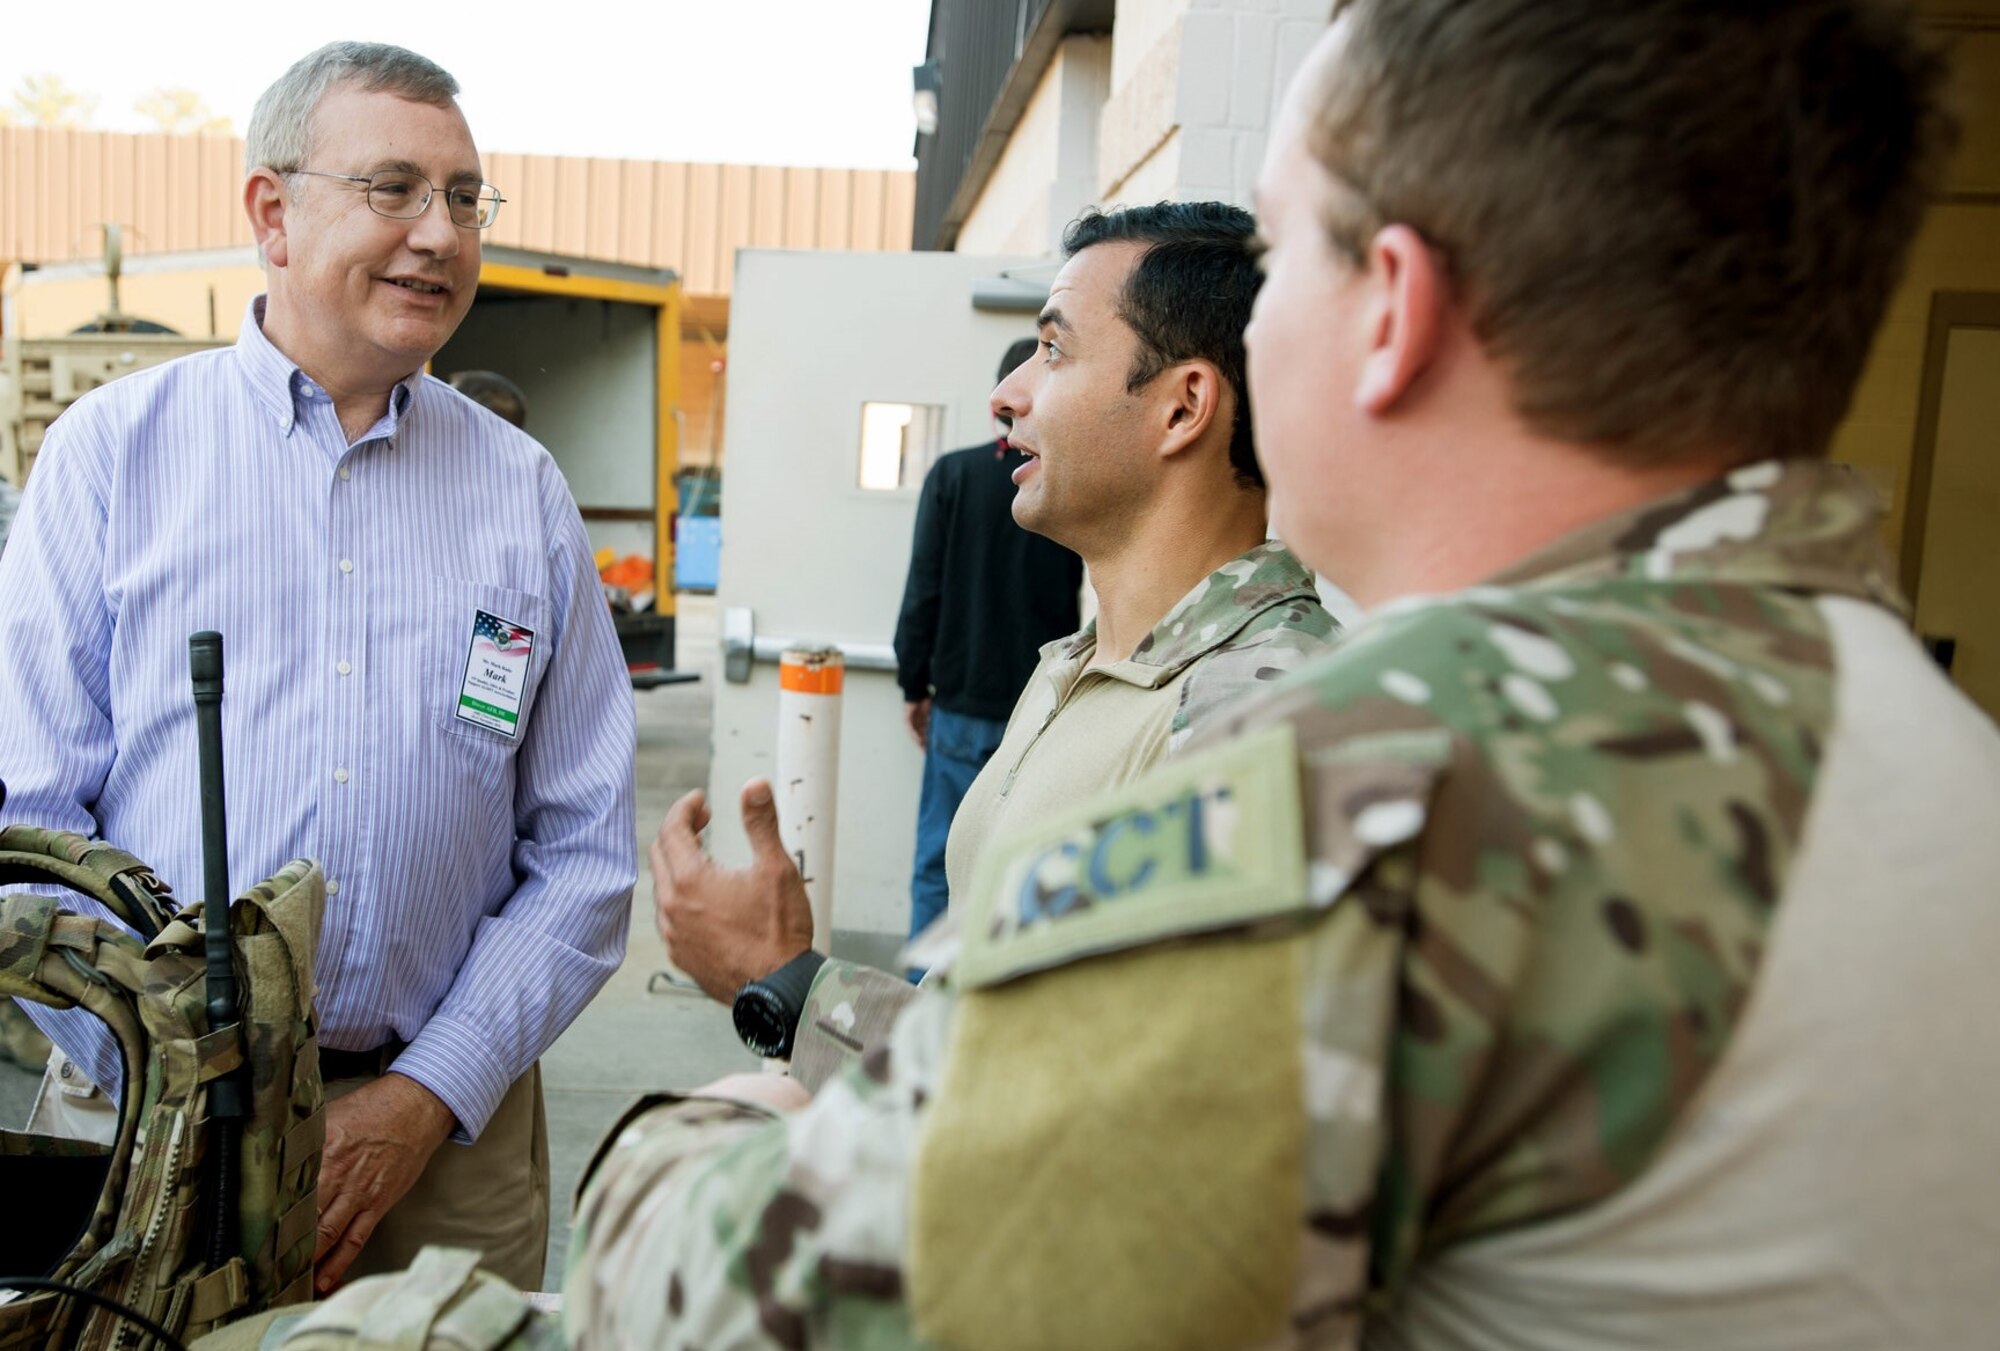 Mark R. Rudo, an AMC civic leader representing Dover Air Force Base, Del., learns about the special tactics mission and how AMC supports the special tactics mission at the 21st Special Tactics Squadron on Pope Army Airfield, N.C. Nov. 16, 2016. The visit was part of the AMC civic leader tour of the AMC mission at Pope AAF.  The tour provided insight into AMC’s prominent role enabling joint mission effects globally. (U.S. Air Force photo by Marc Barnes)